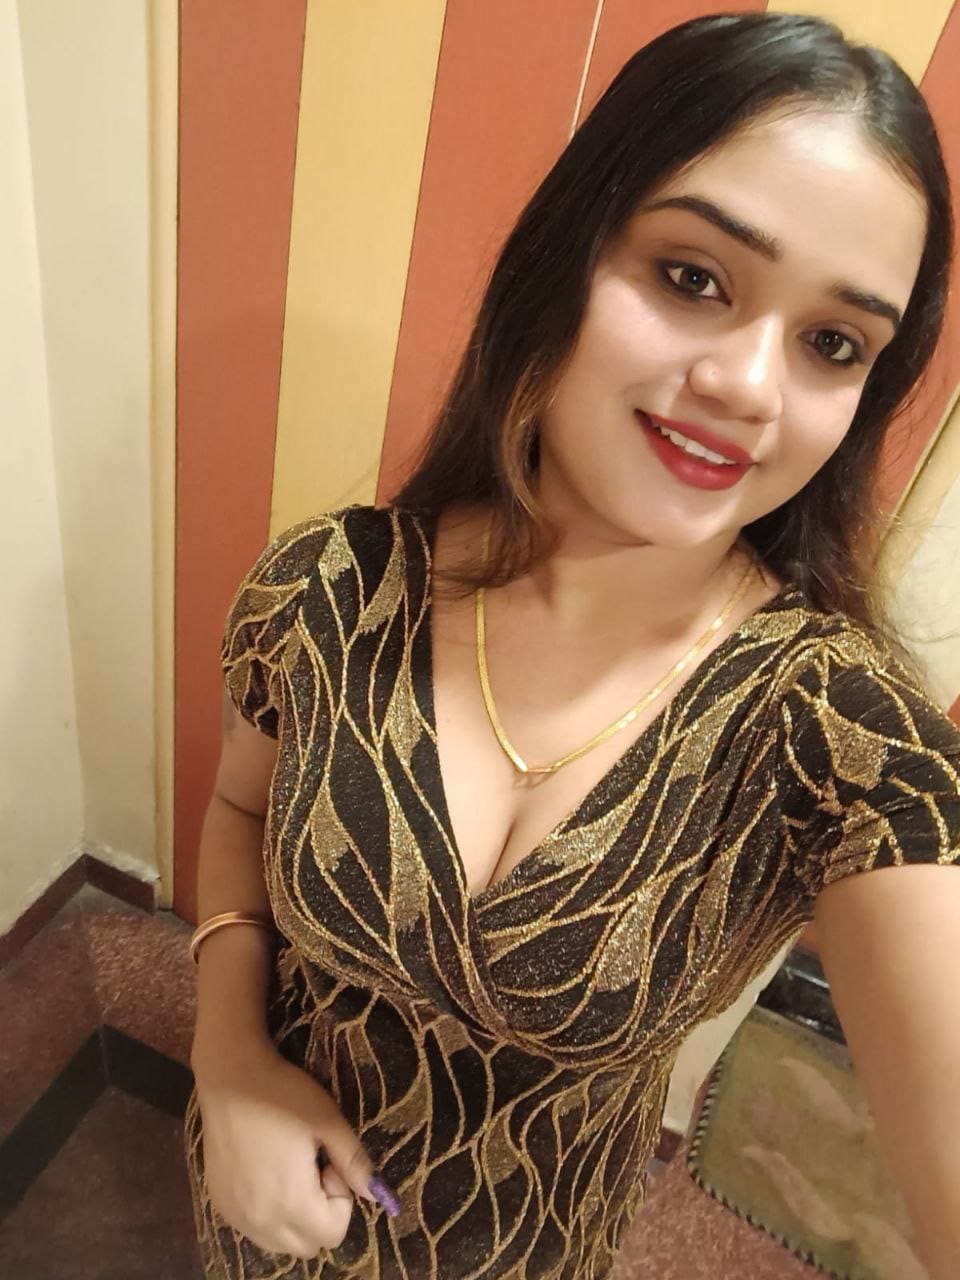 Varanasi BEST SAFE AND GENINUE VIP LOW BUDGET CALL GIRL CALL ME NOW